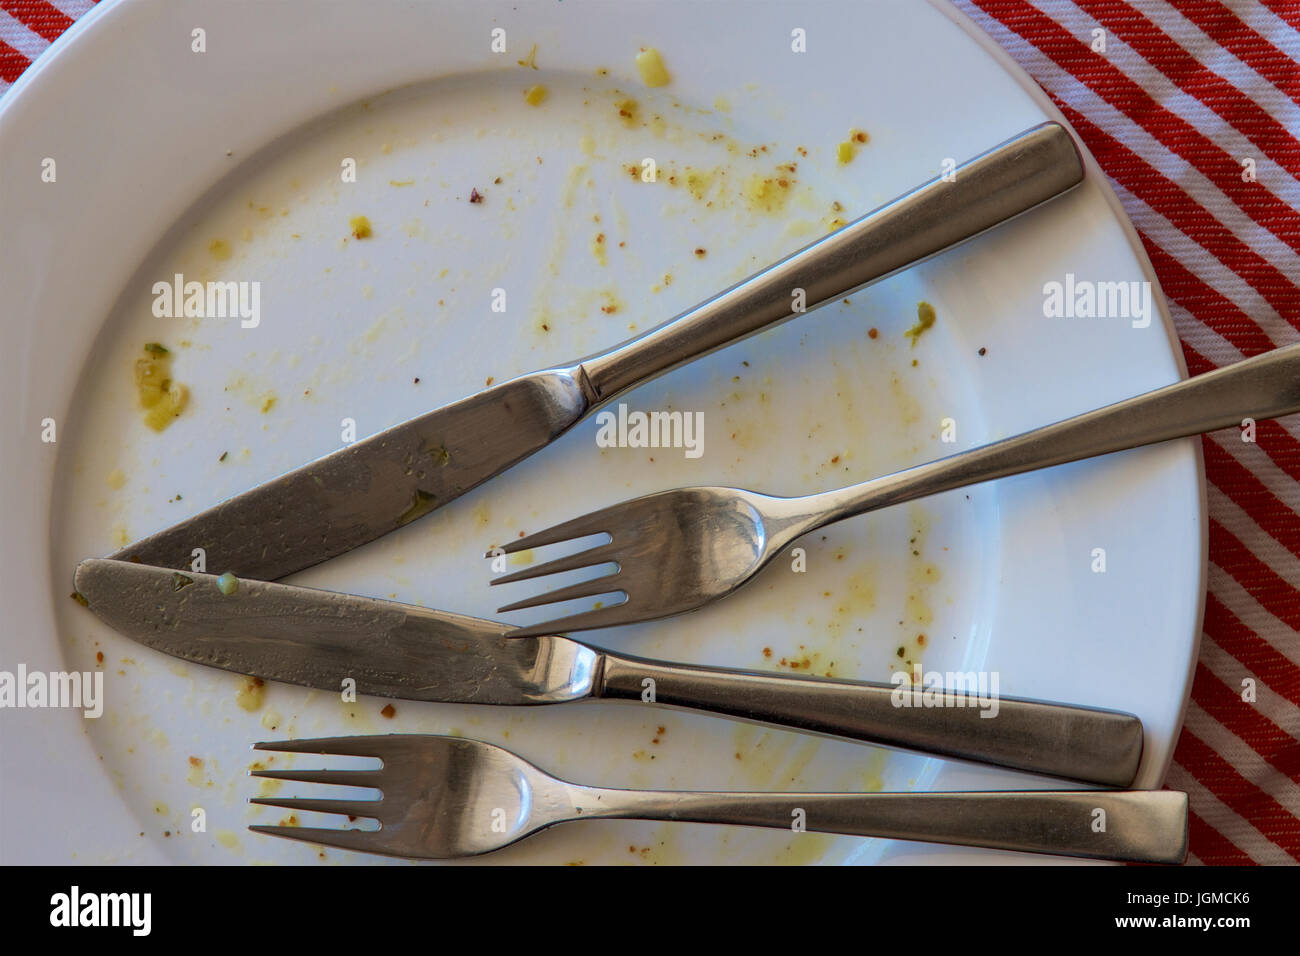 Dirty plates and cutlery after a meal. Stock Photo